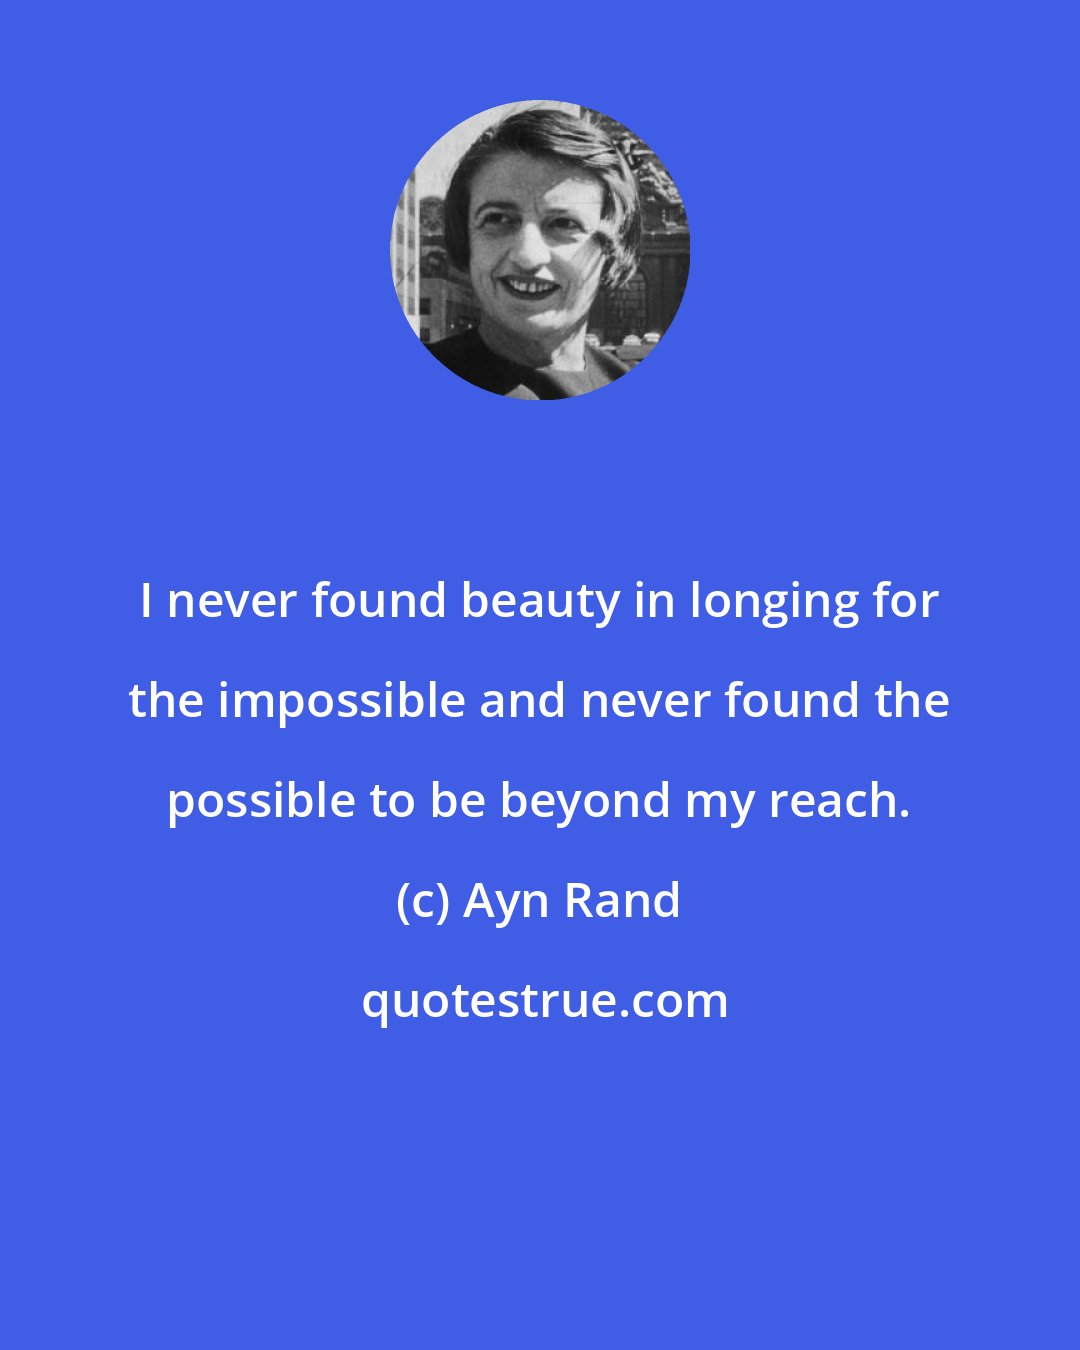 Ayn Rand: I never found beauty in longing for the impossible and never found the possible to be beyond my reach.